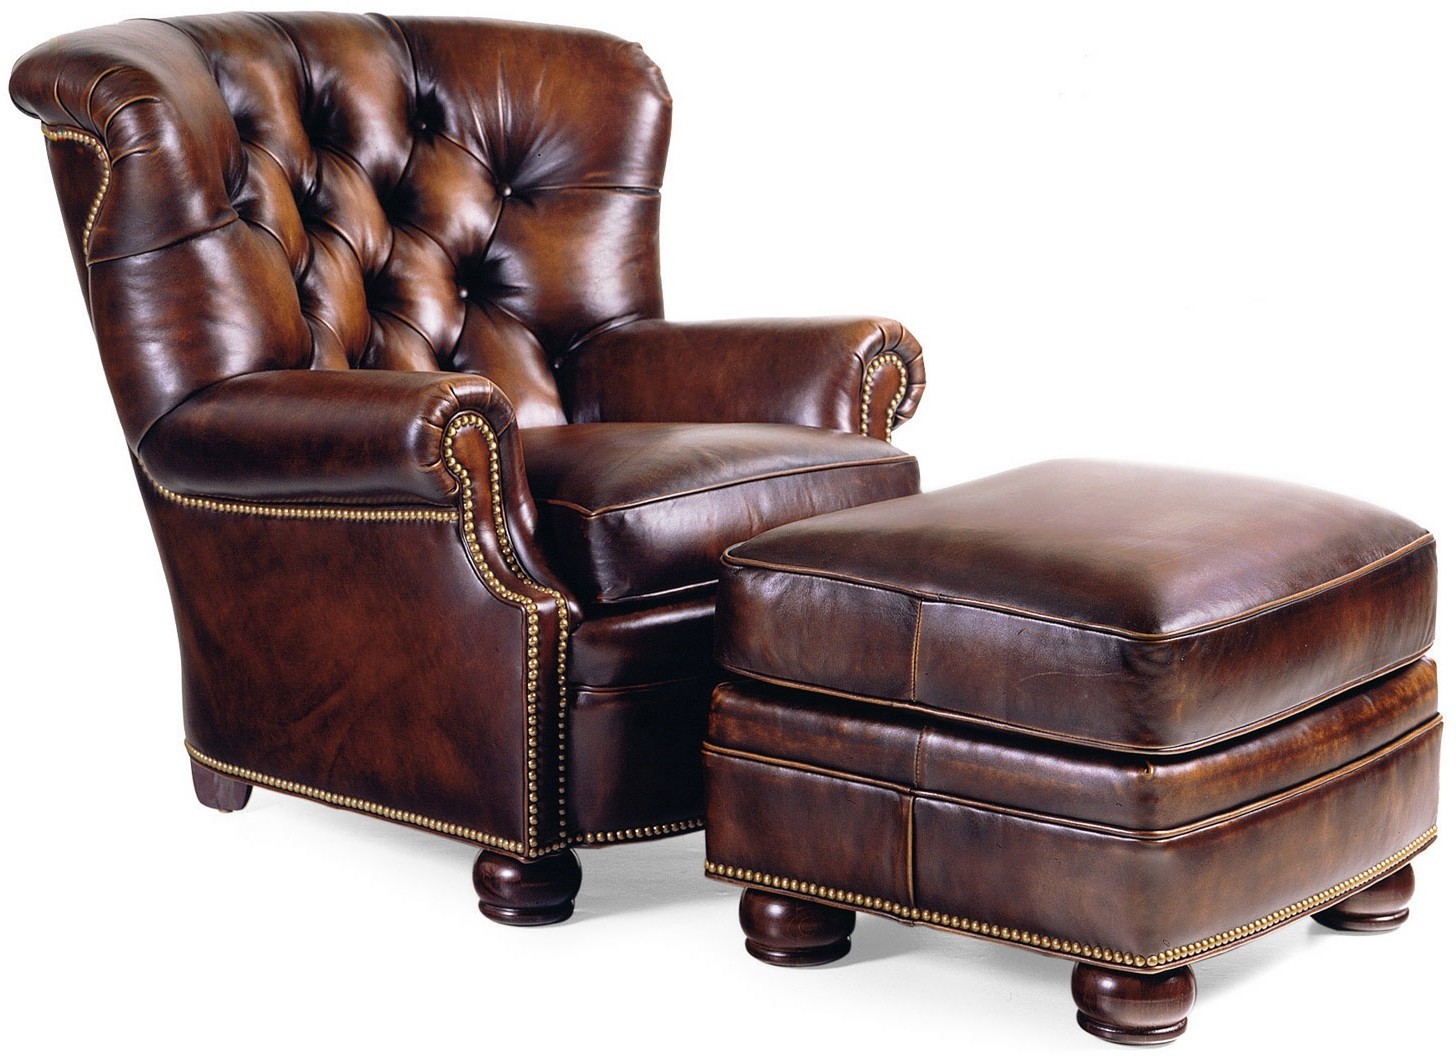 Classic tufted leather armchair and ottoman bernadette